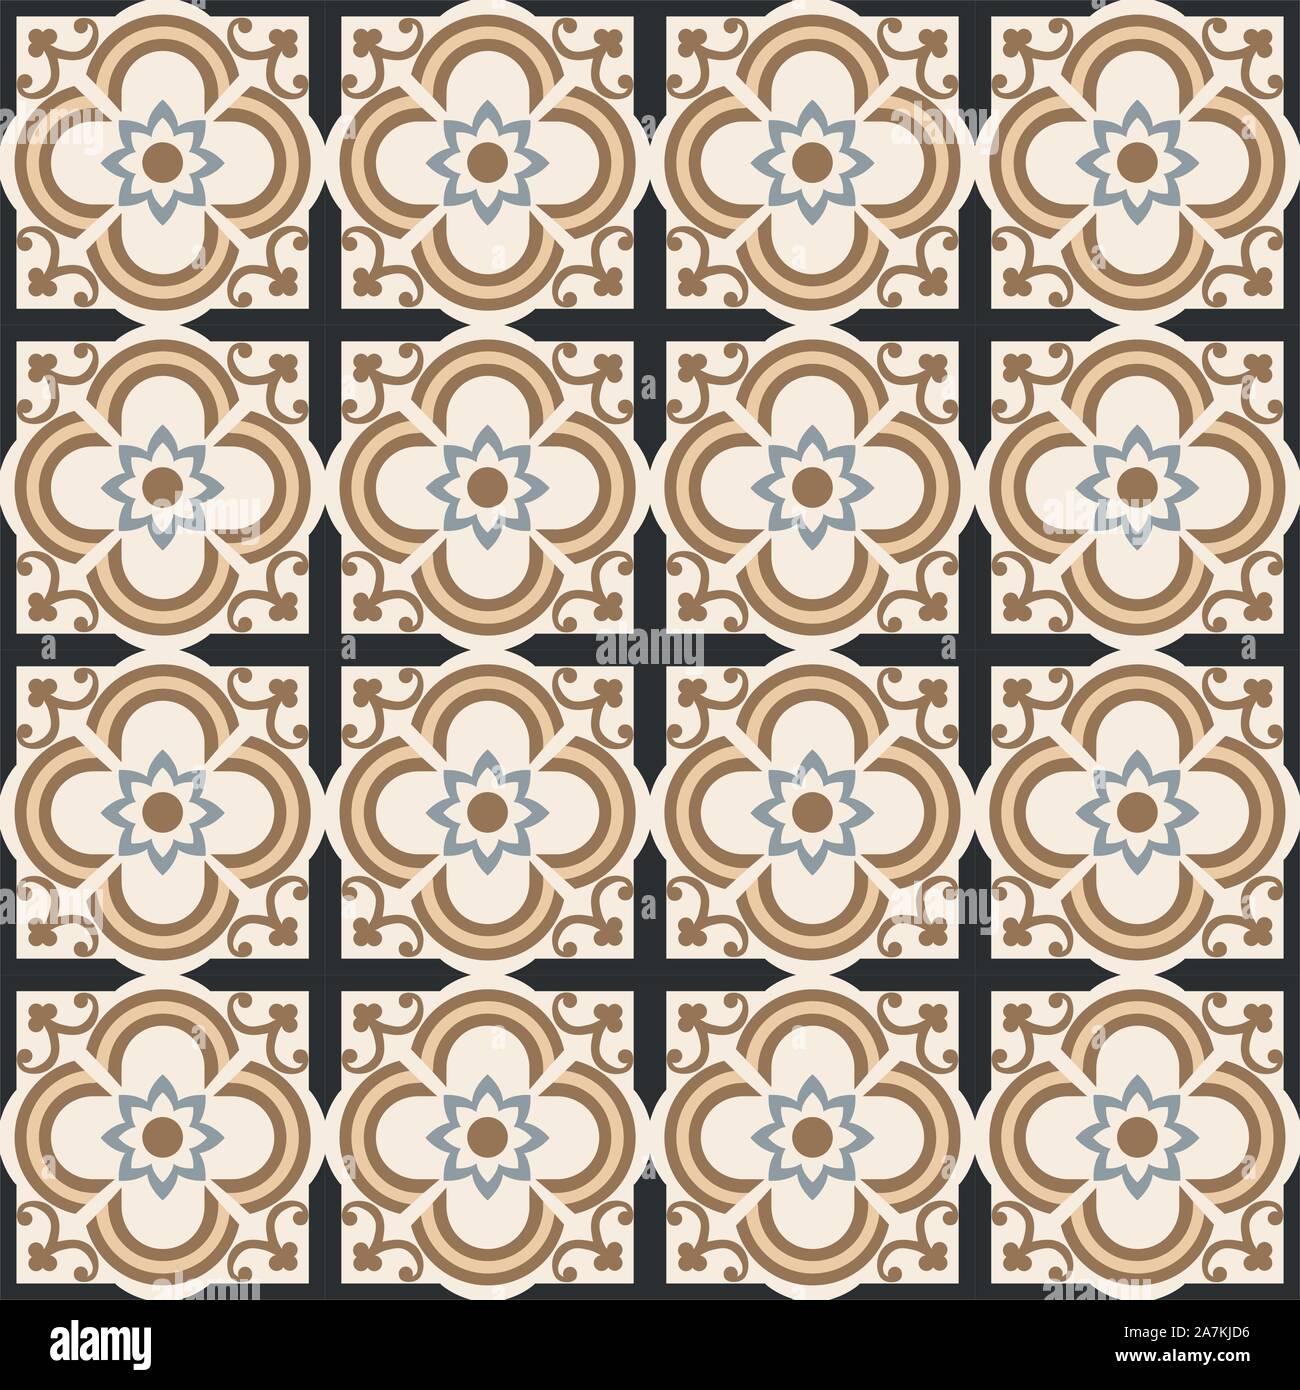 Beautiful yellow and black floral seamless mosaic pattern Stock Vector